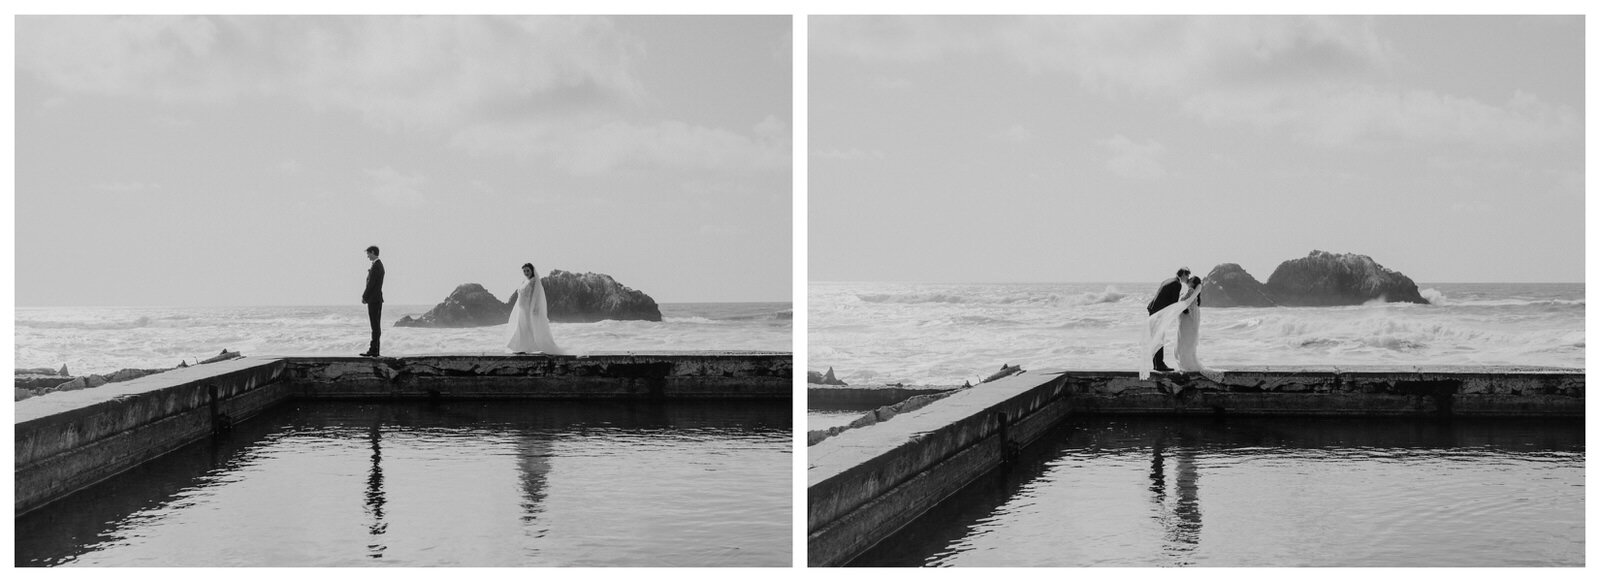 Sutro Baths First Look in San Francisco Elopement - bride and groom at the ocean - photo by Kept Record | www.keptrecord.com